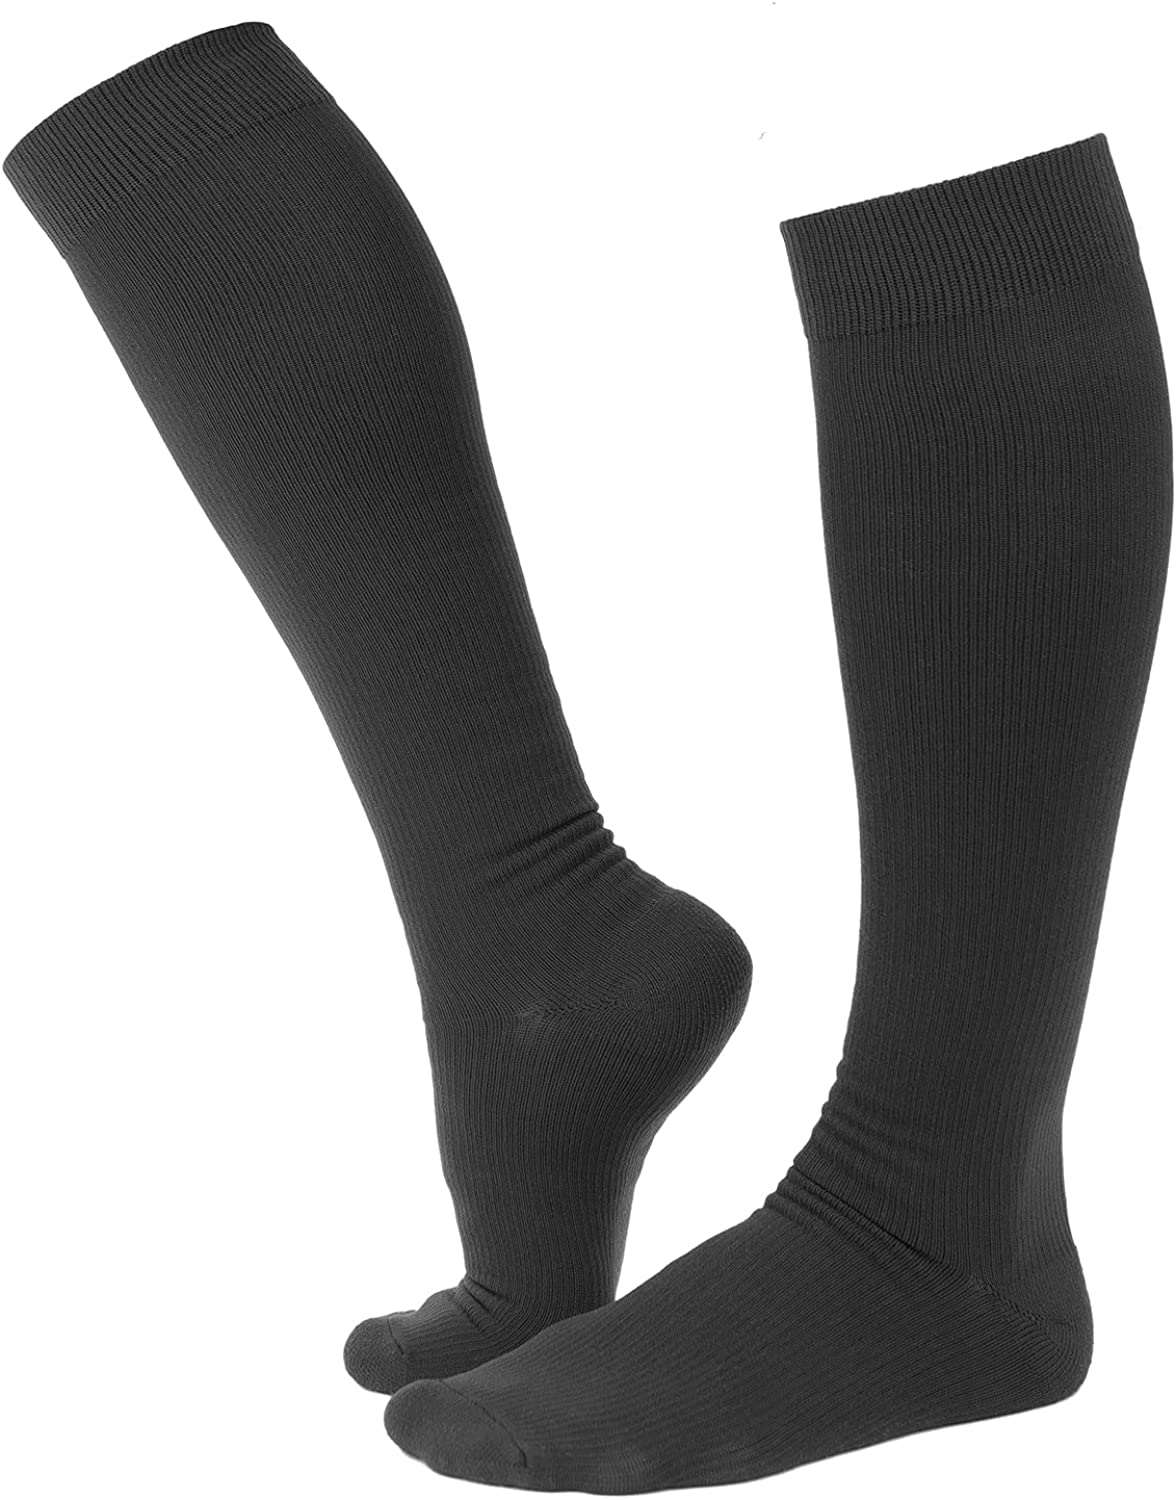 Medical Compression Socks for Women and Men 3 Pairs 20-30 mmHg Knee High  Compression Stockings Circulation Best for Running Athletic Nurses